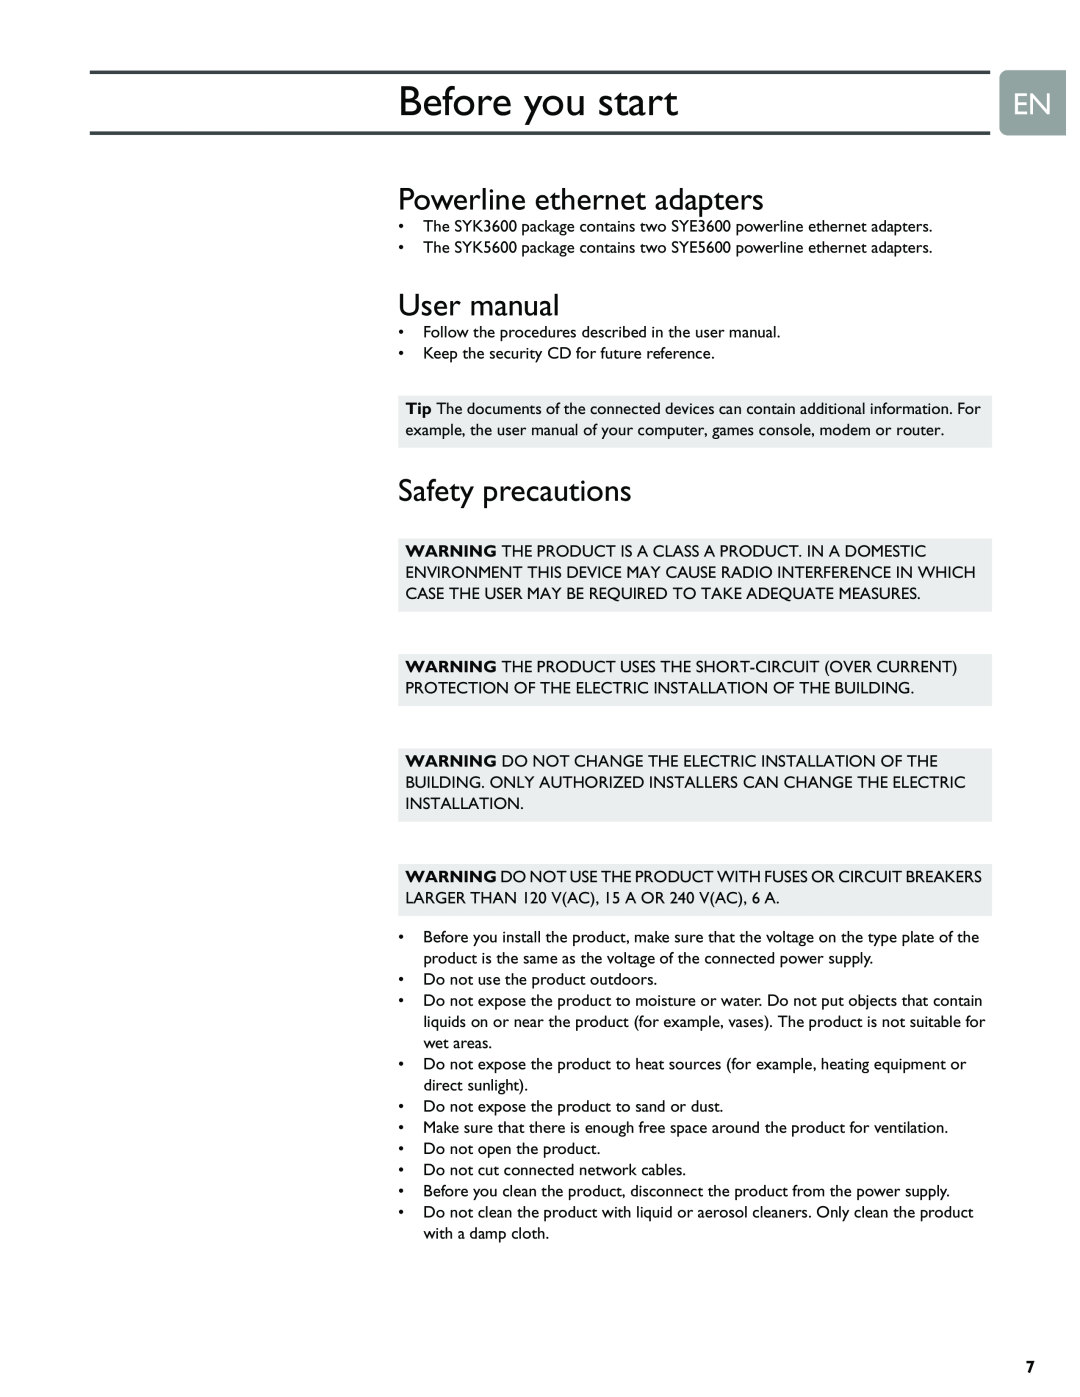 Philips SYE5600 user manual Before you start, Powerline ethernet adapters, Safety precautions 